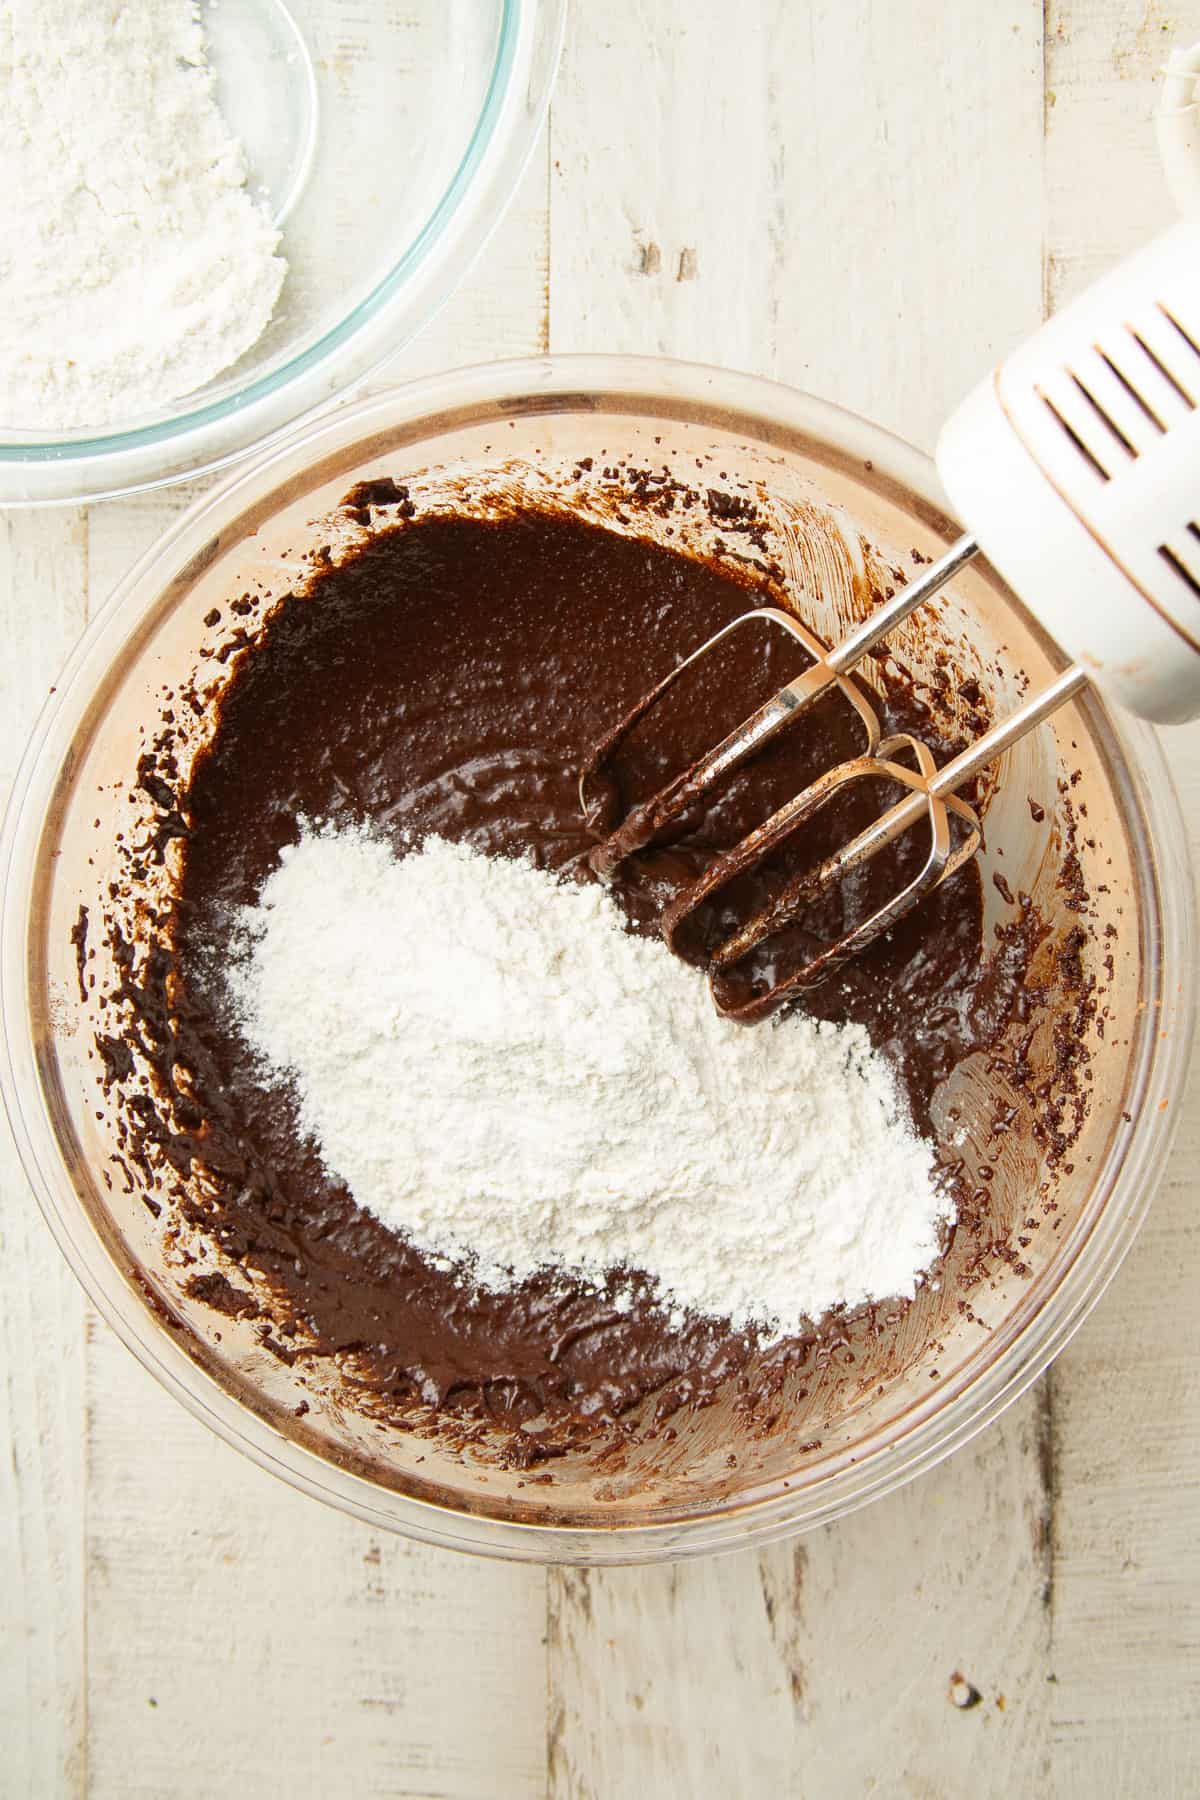 Flour being added to chocolate cookie dough in a bowl with mixer.